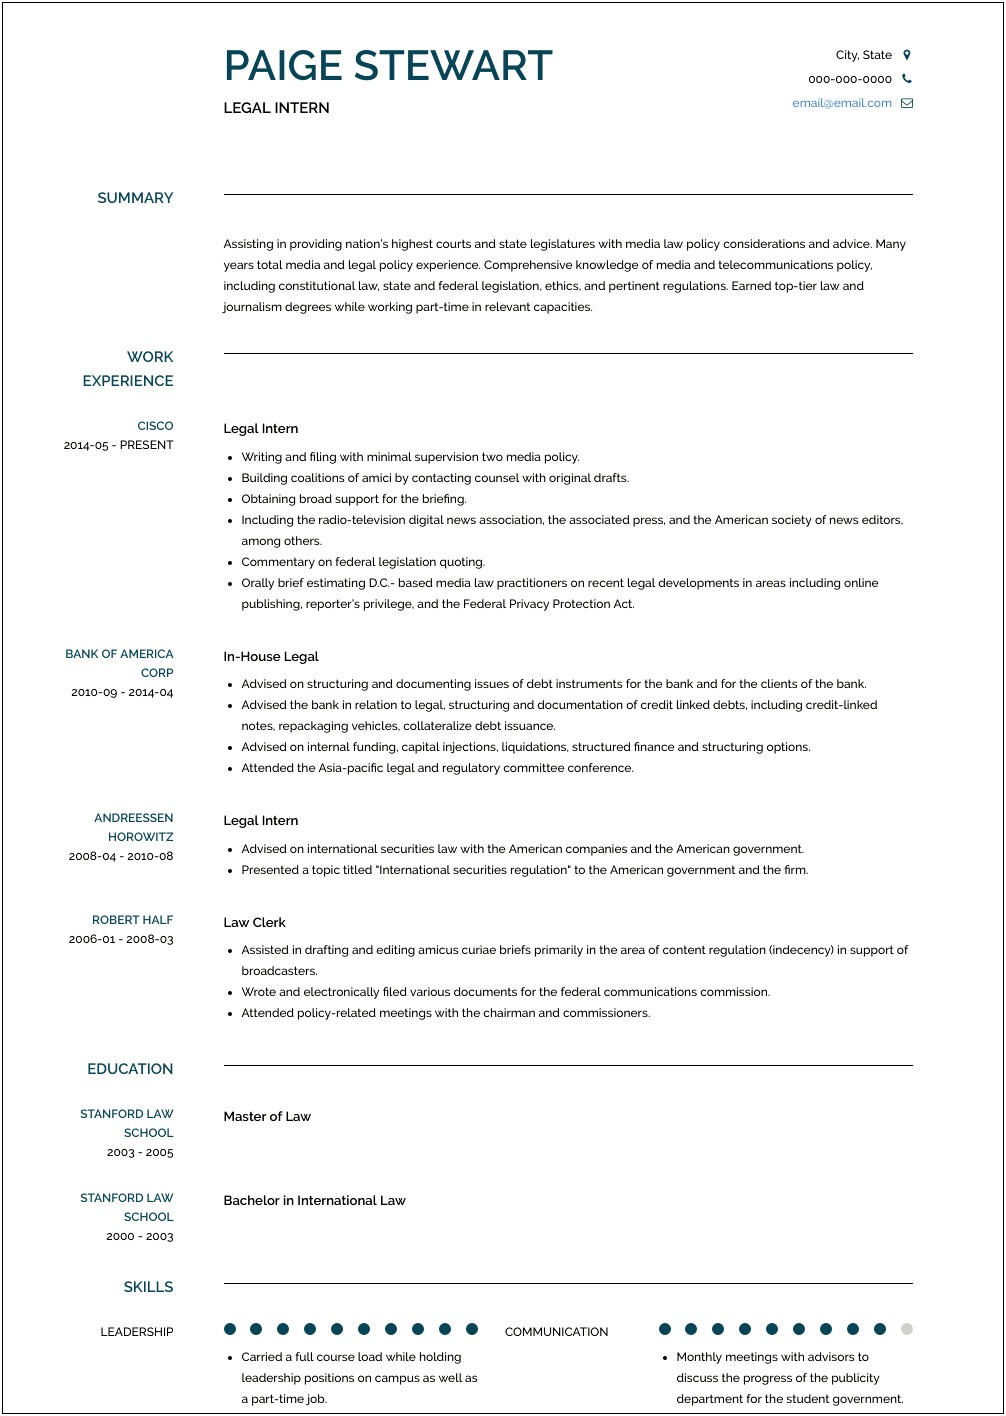 Resume Objective For Law Firm Internship